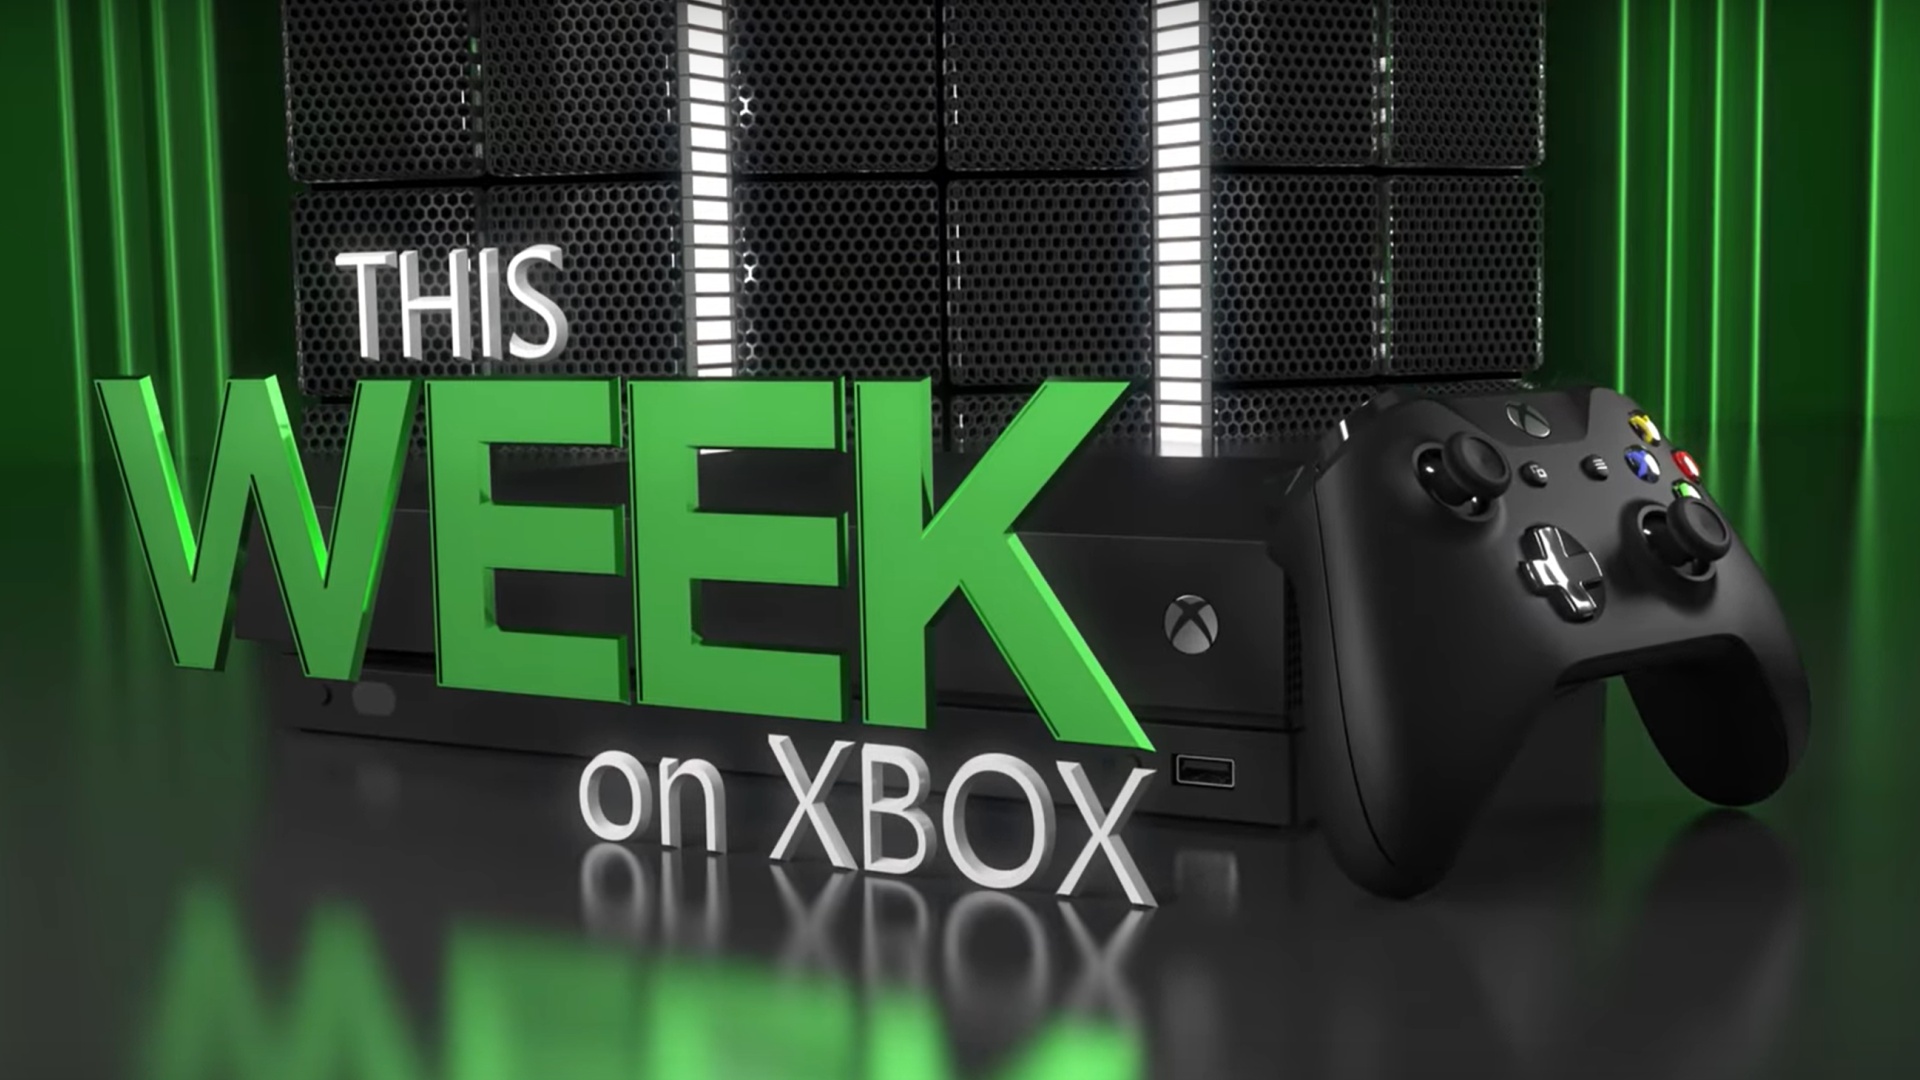 Video For This Week on Xbox: January 31, 2020